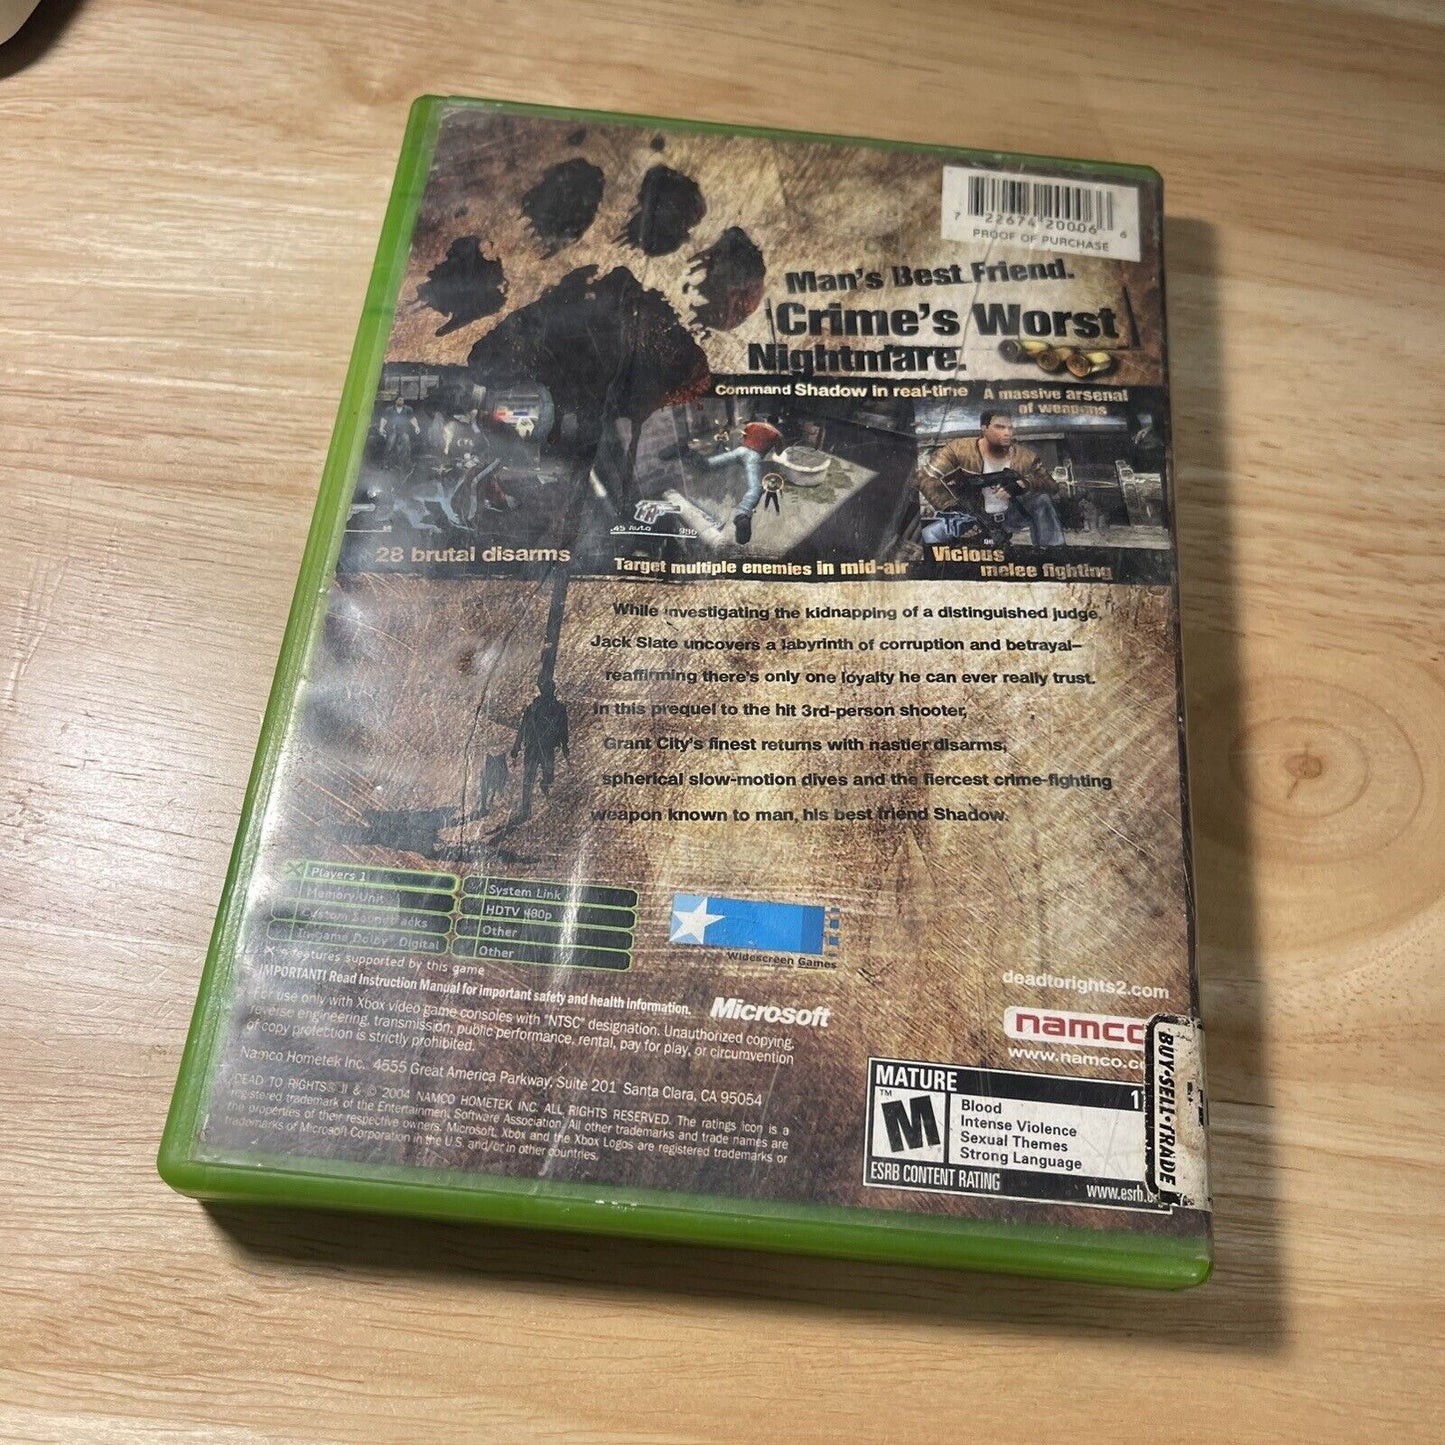 Dead to Rights II (2) (Microsoft Xbox, 2005) Tested & Working